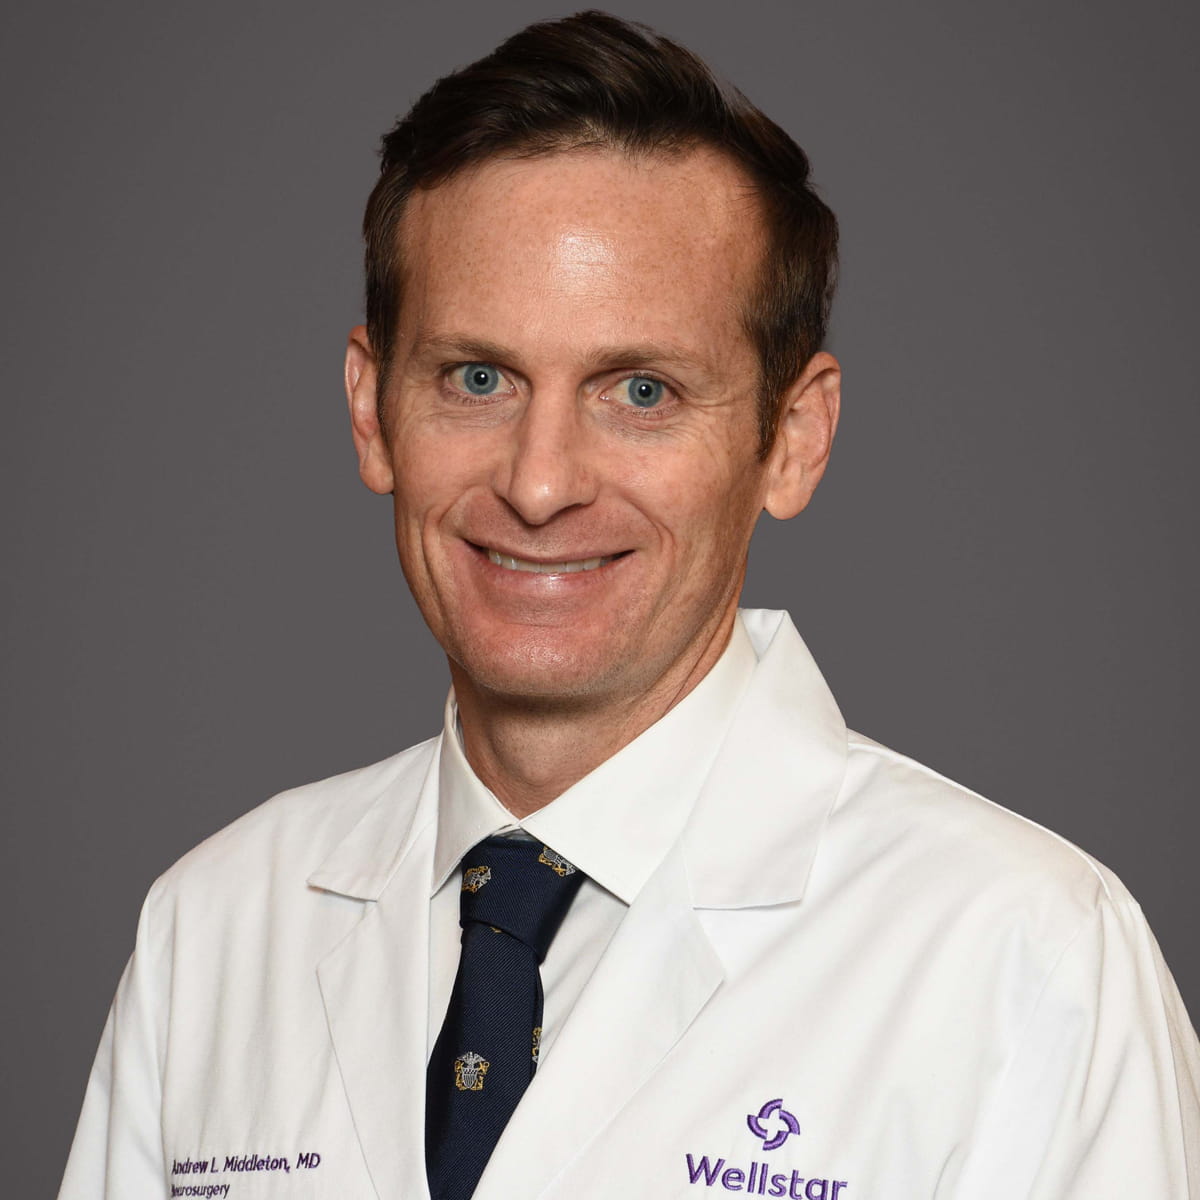 A friendly headshot of Andrew Middleton, MD